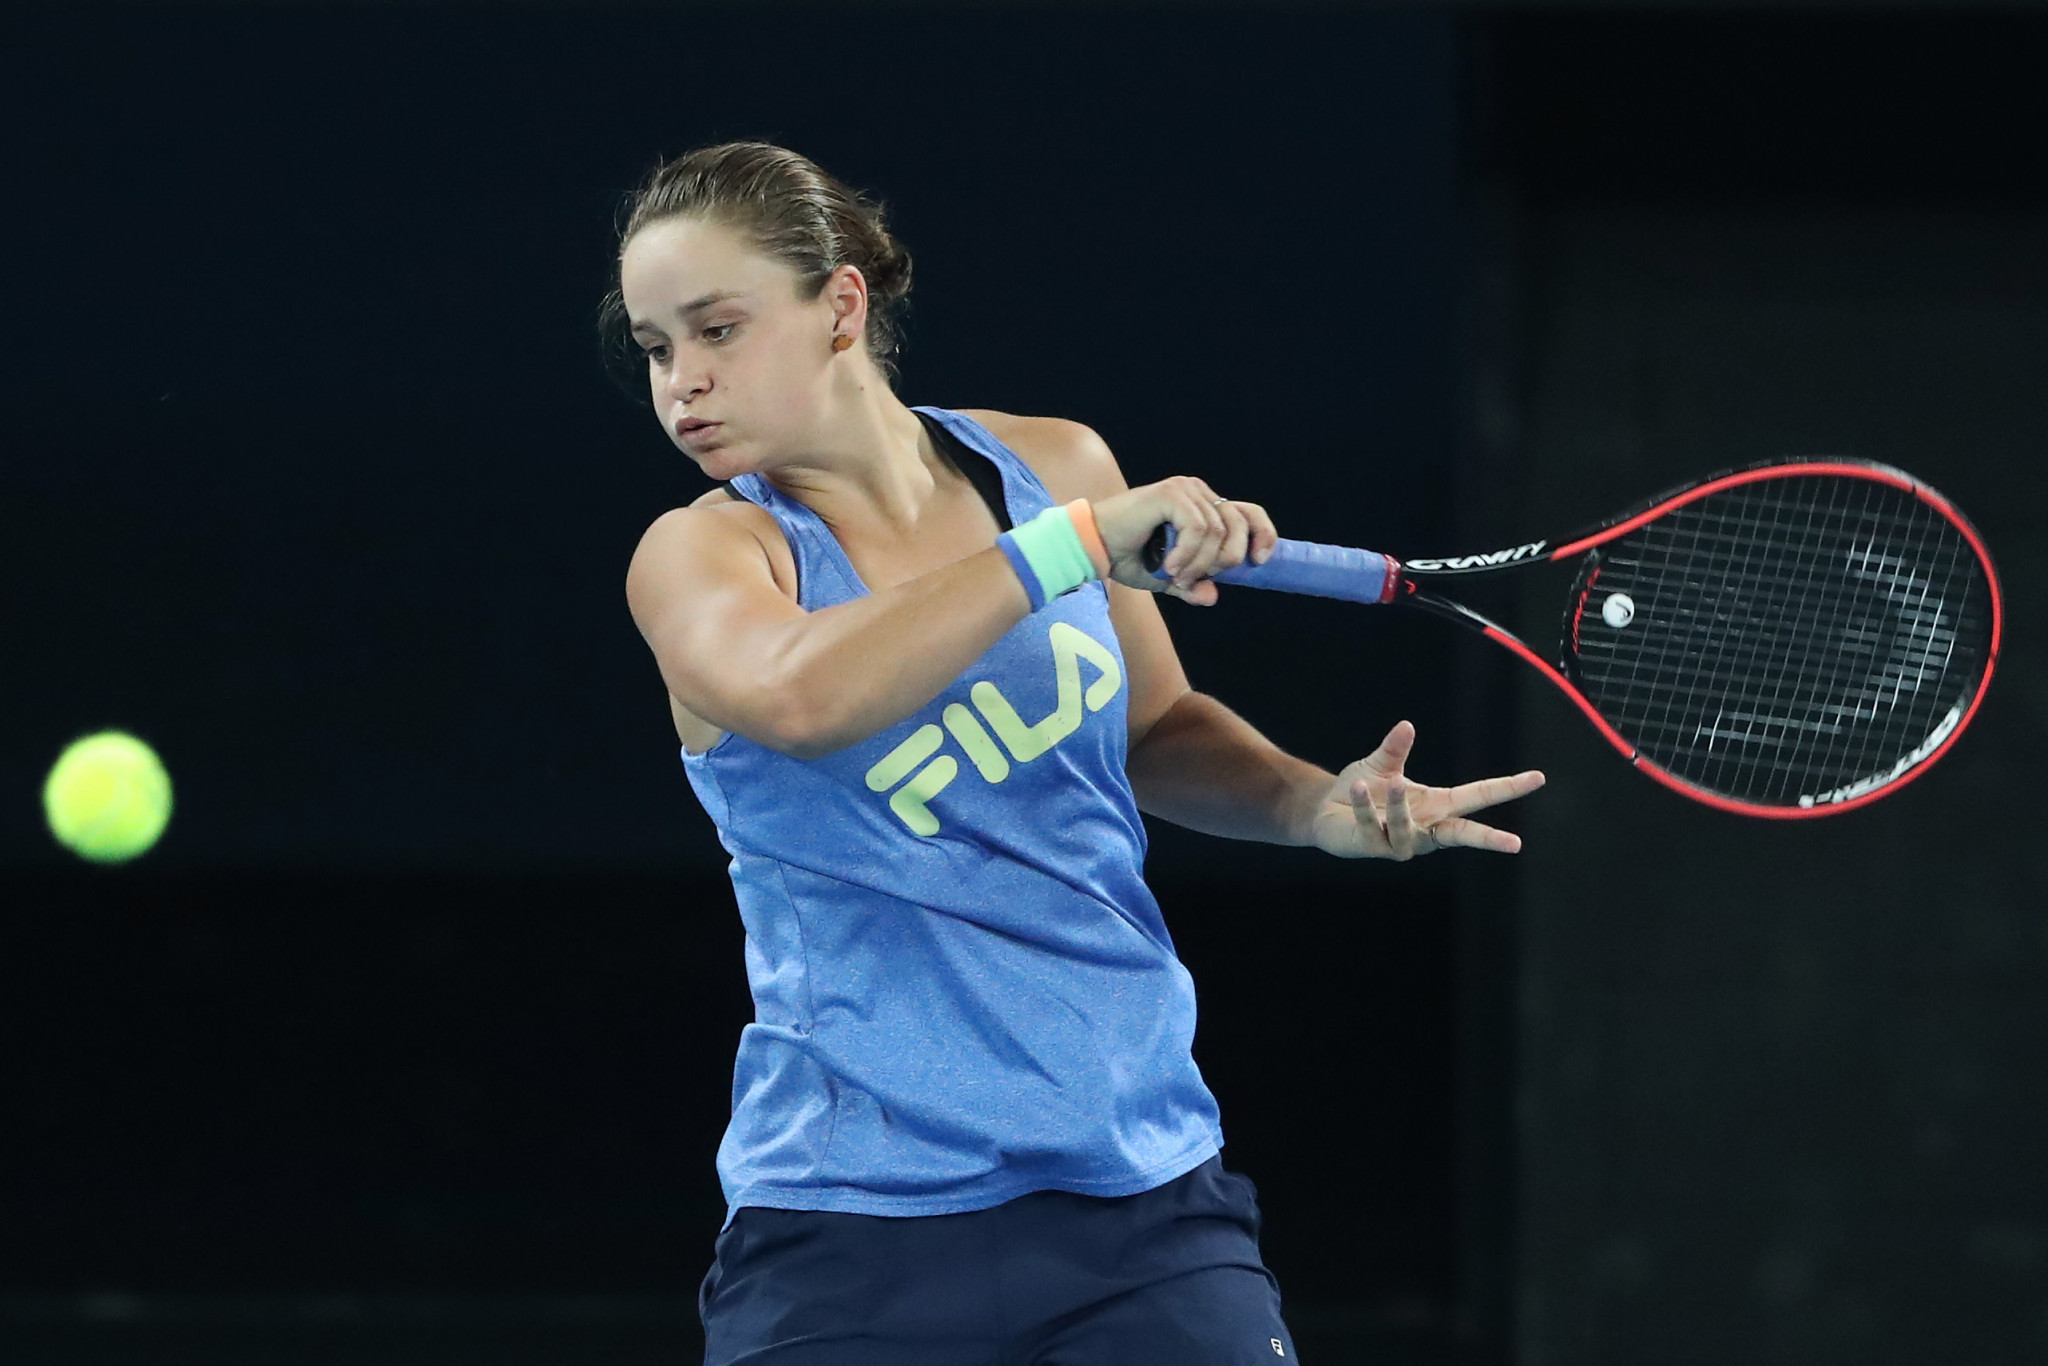 Hosts look to Barty to end long wait for home singles champion at Australian Open